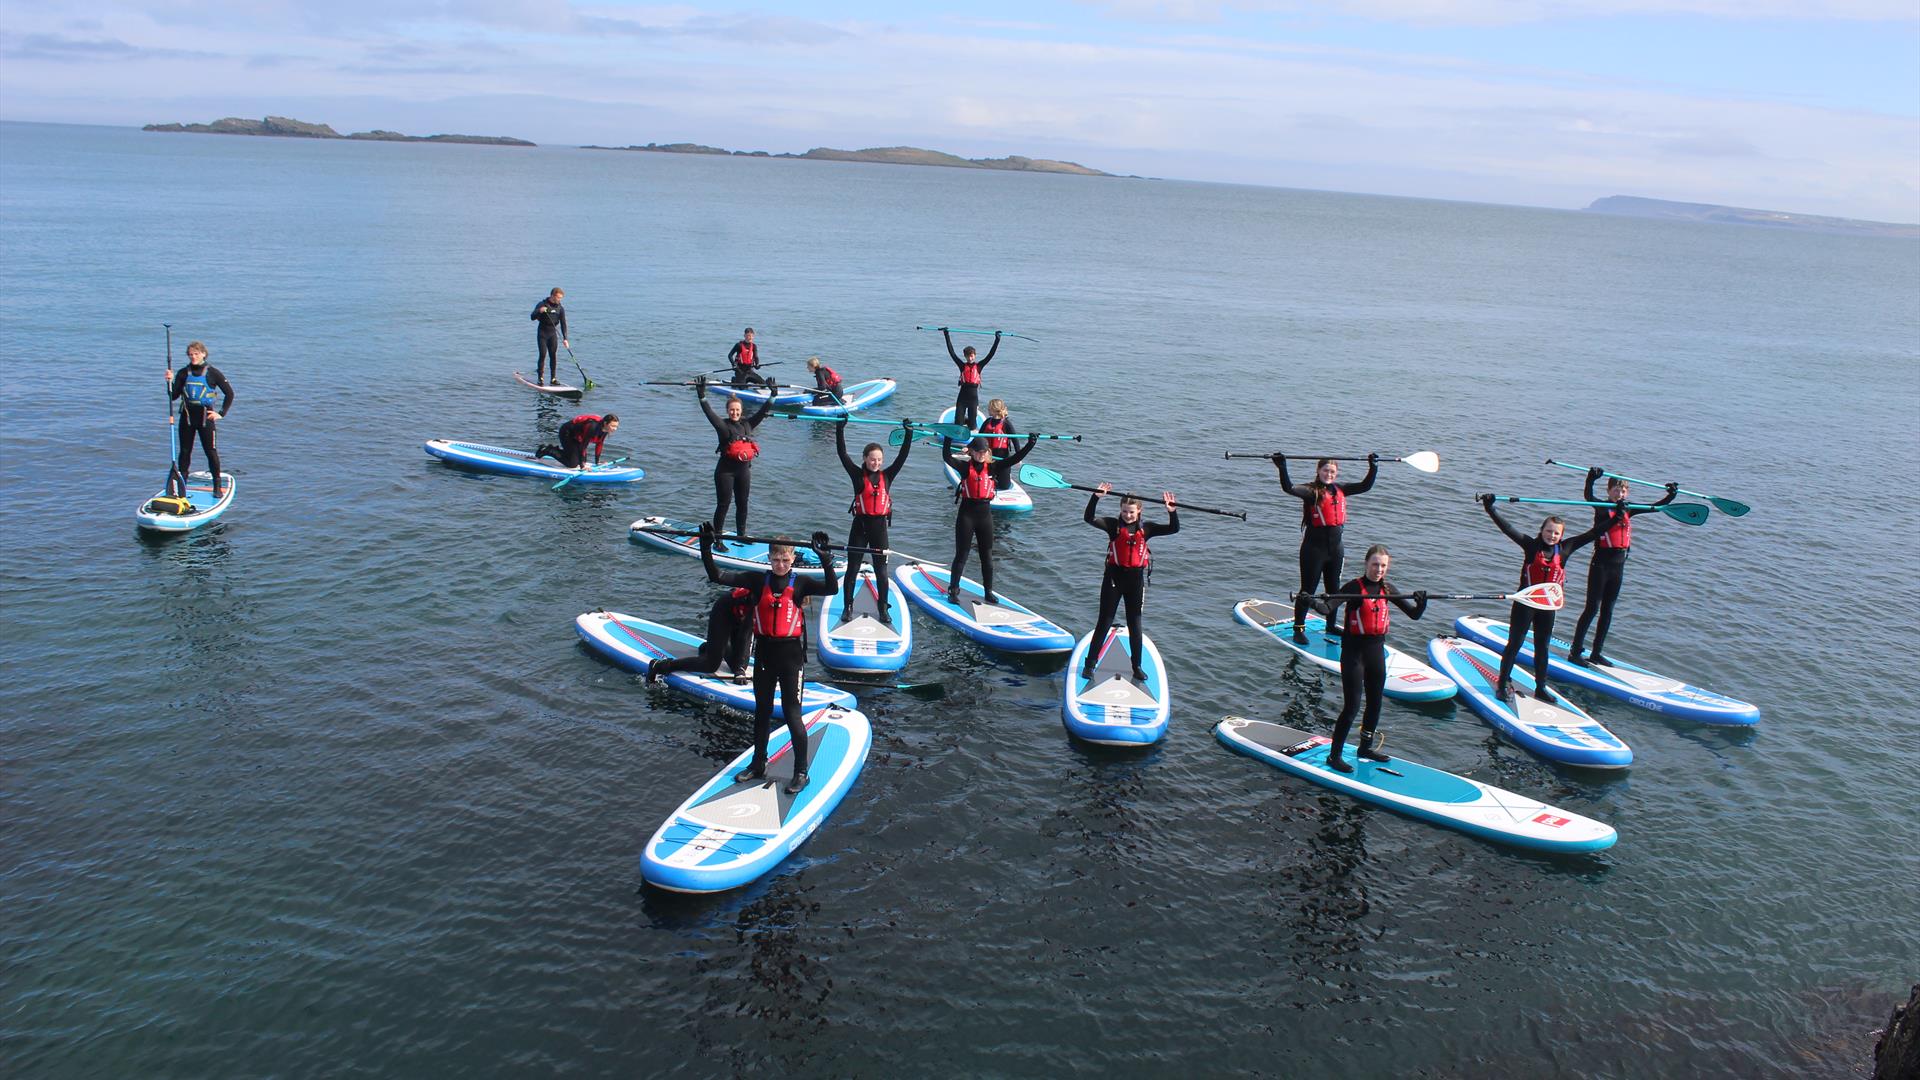 Group of older children and adults standing on paddleboards at sea with paddles raised